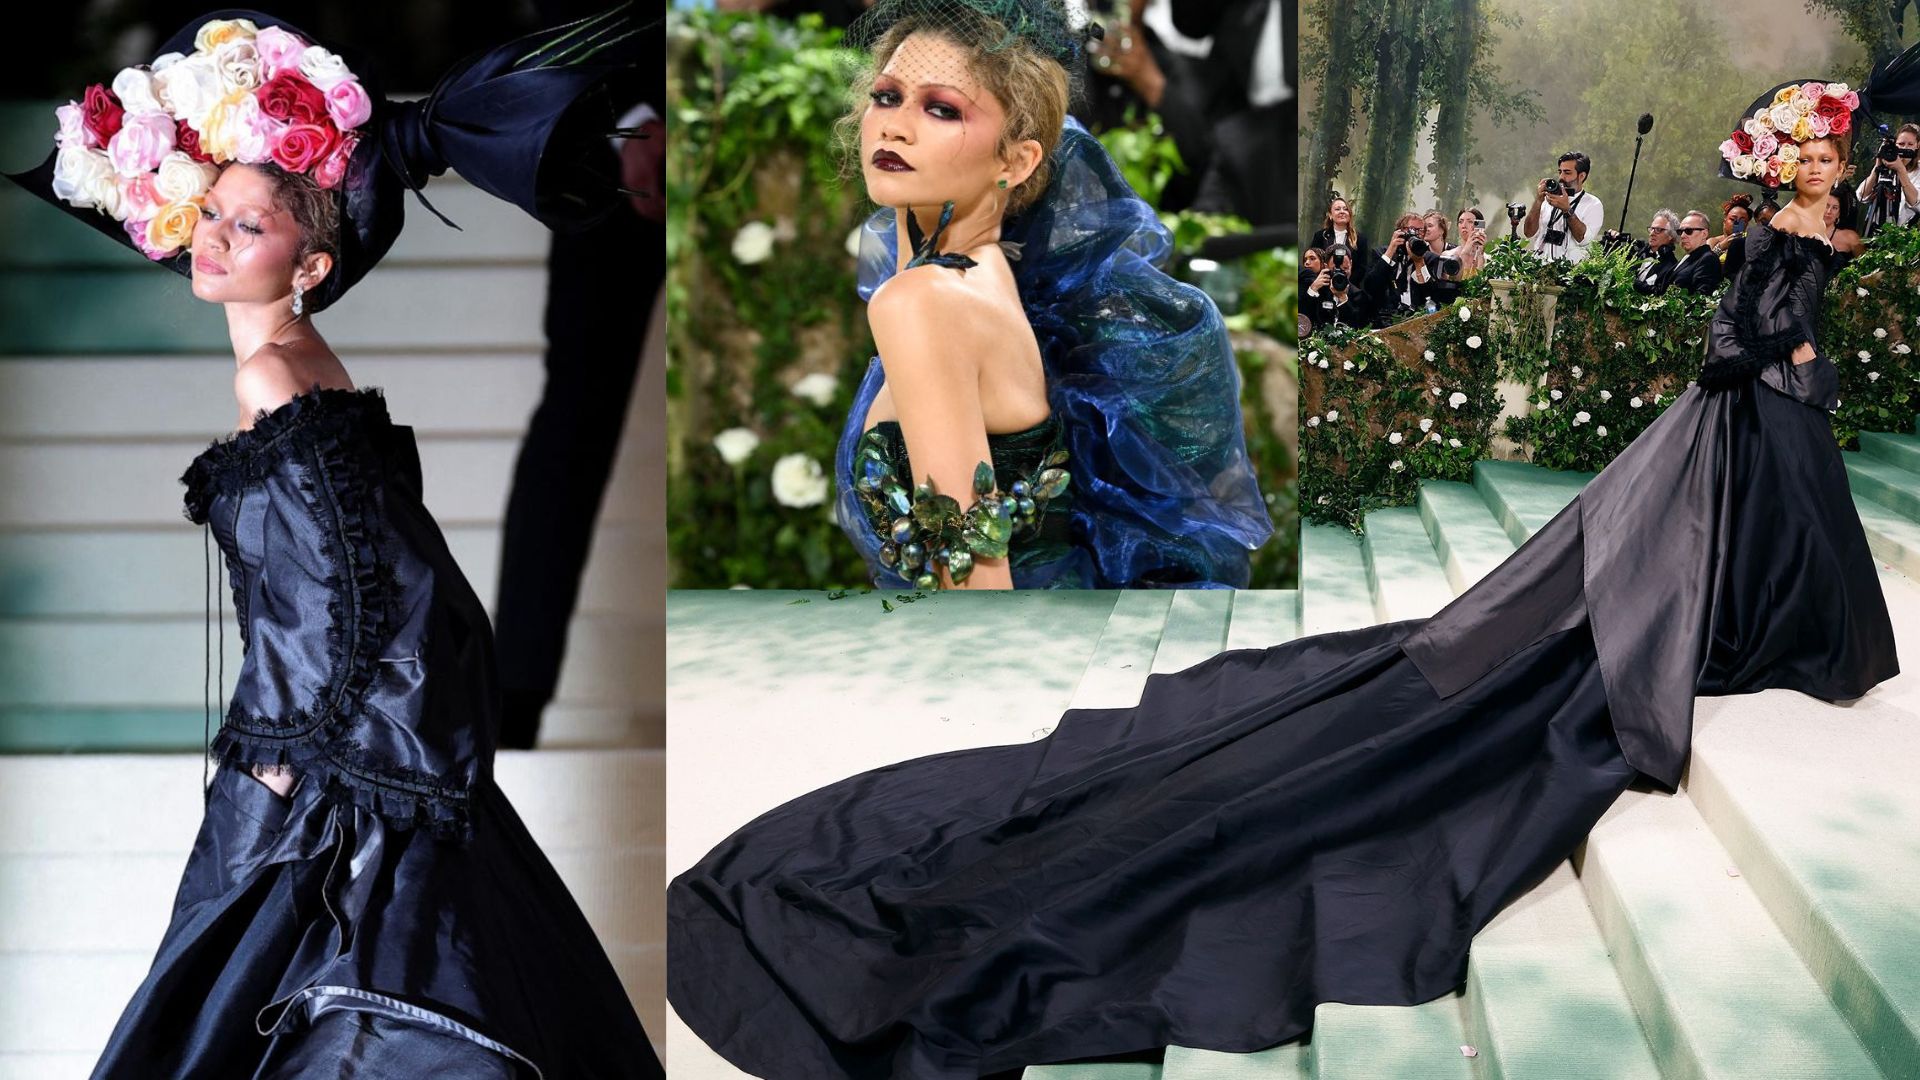 Zendaya who is a Met Gala favourite, presented two showstopping looks for the night.